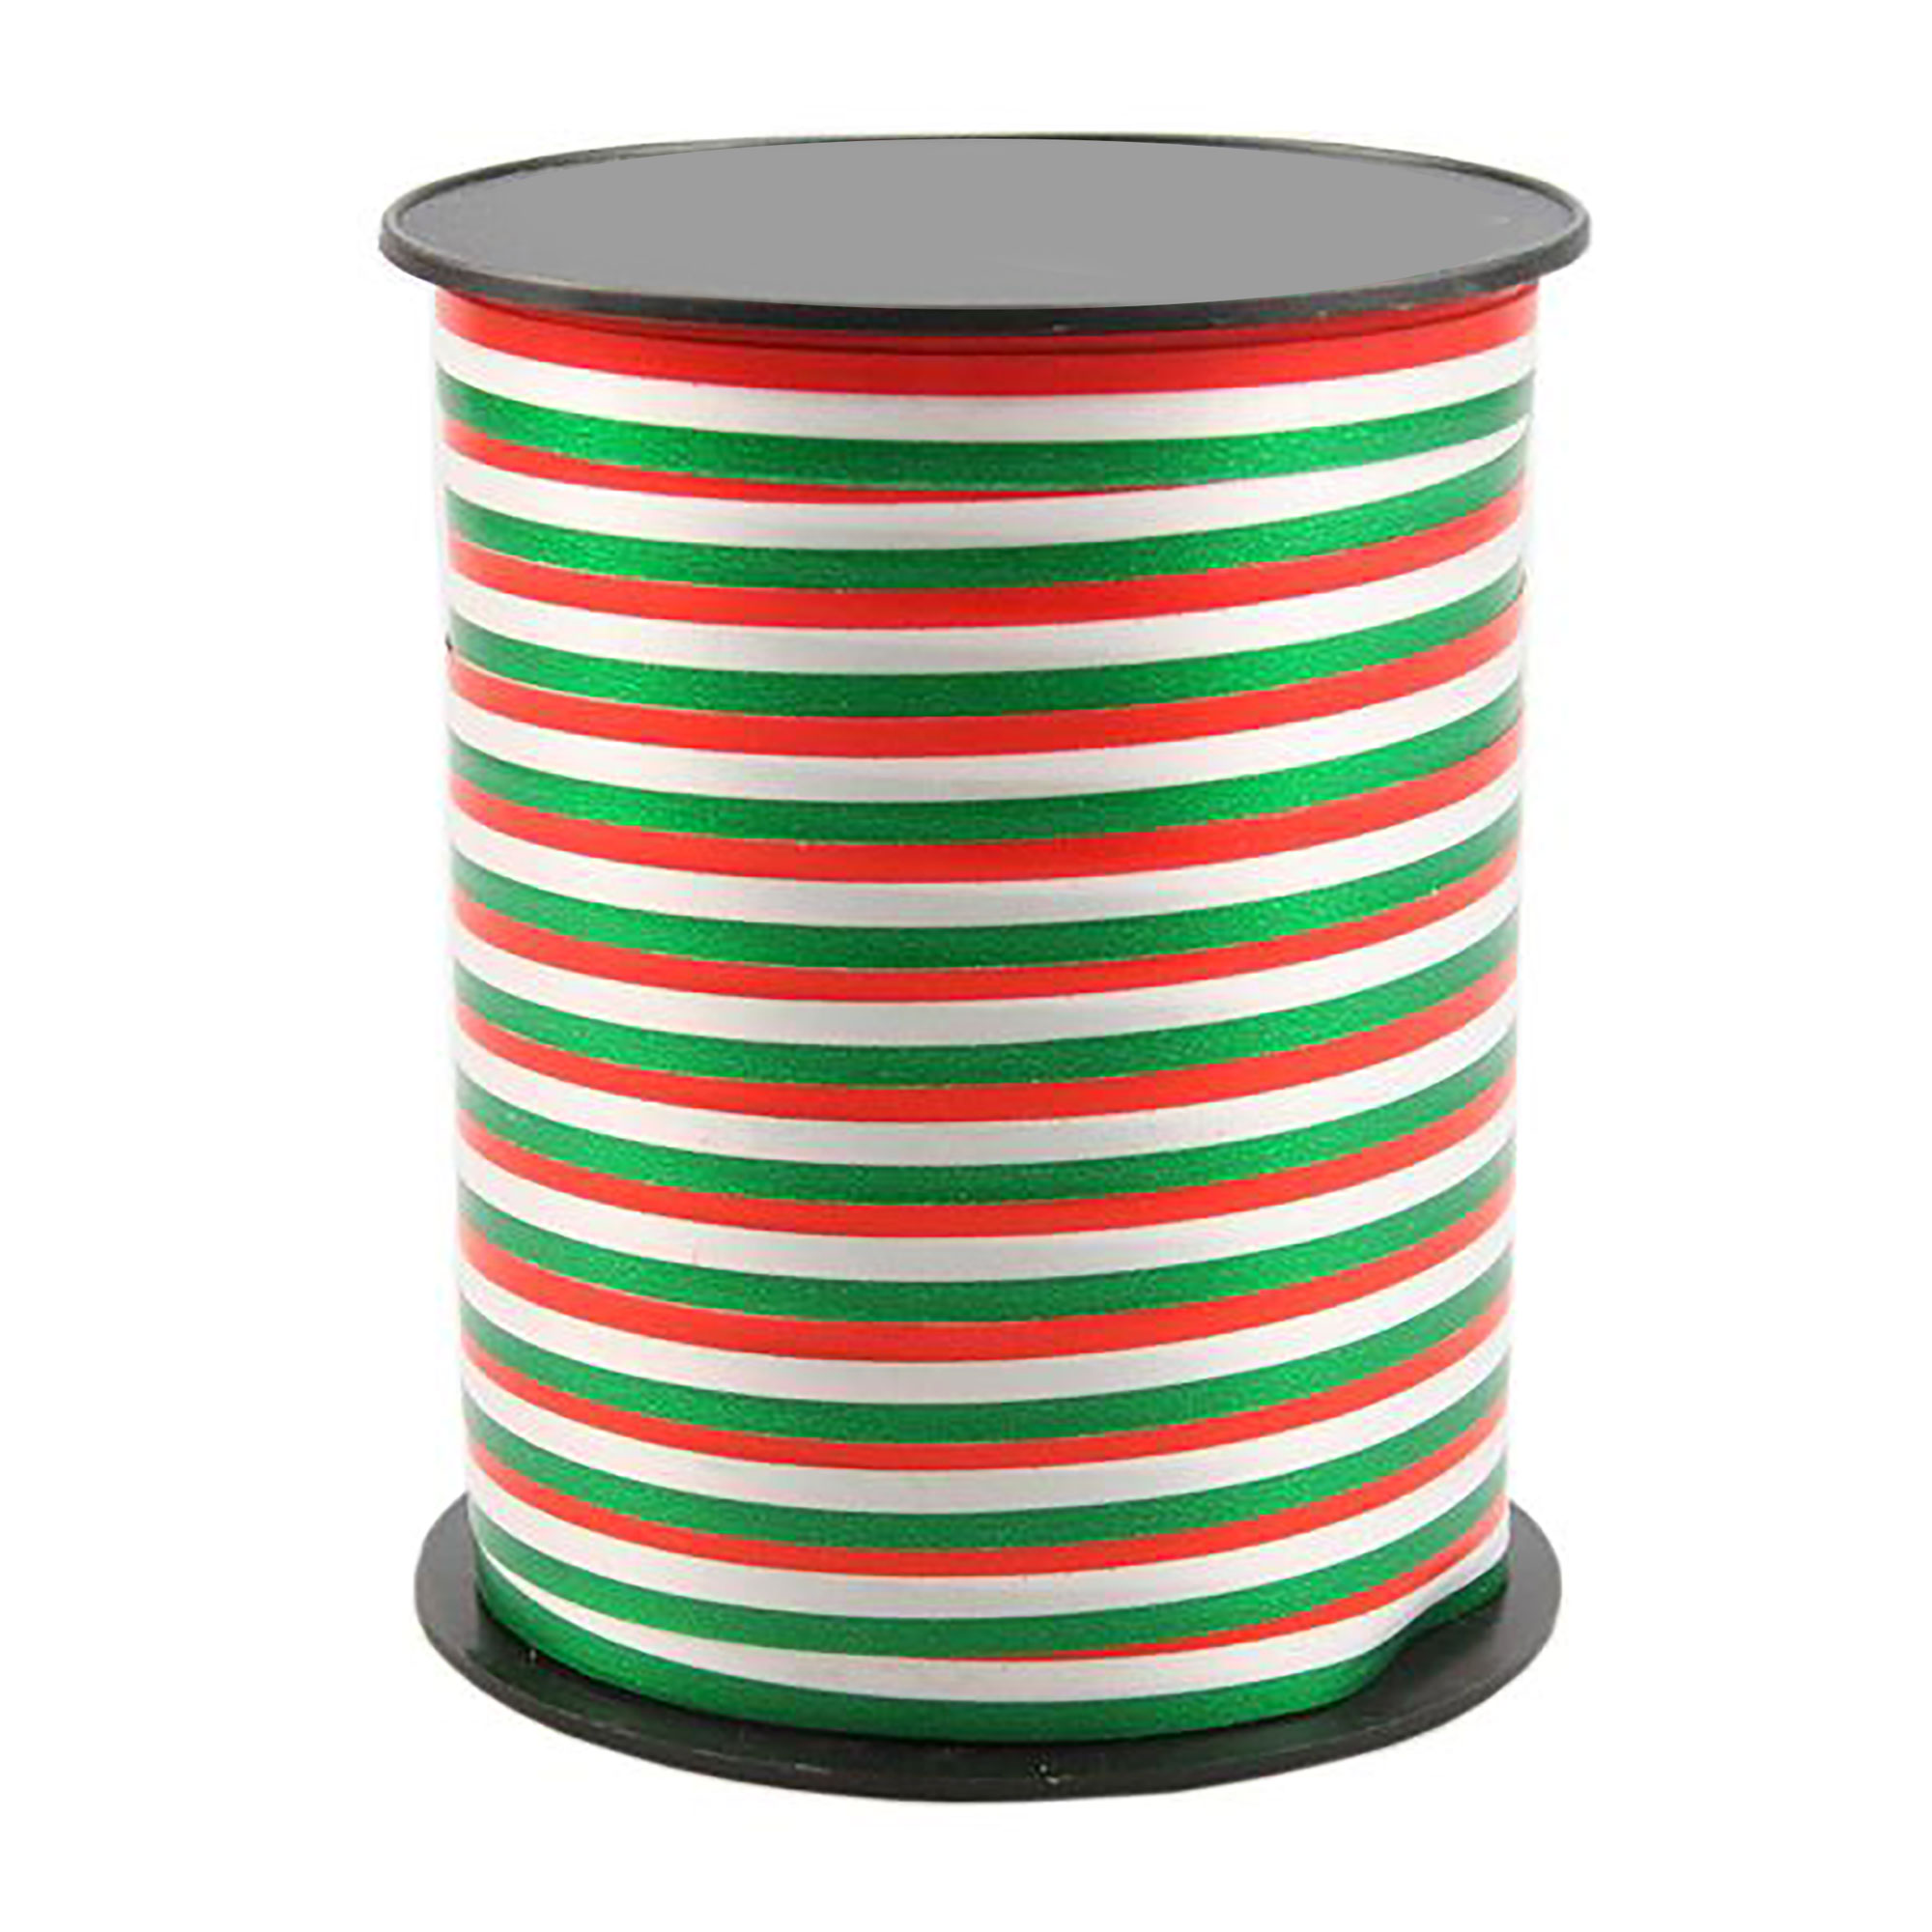 Picture of Rol krullint 10 mm 250 mtr Italië groen/wit/rood